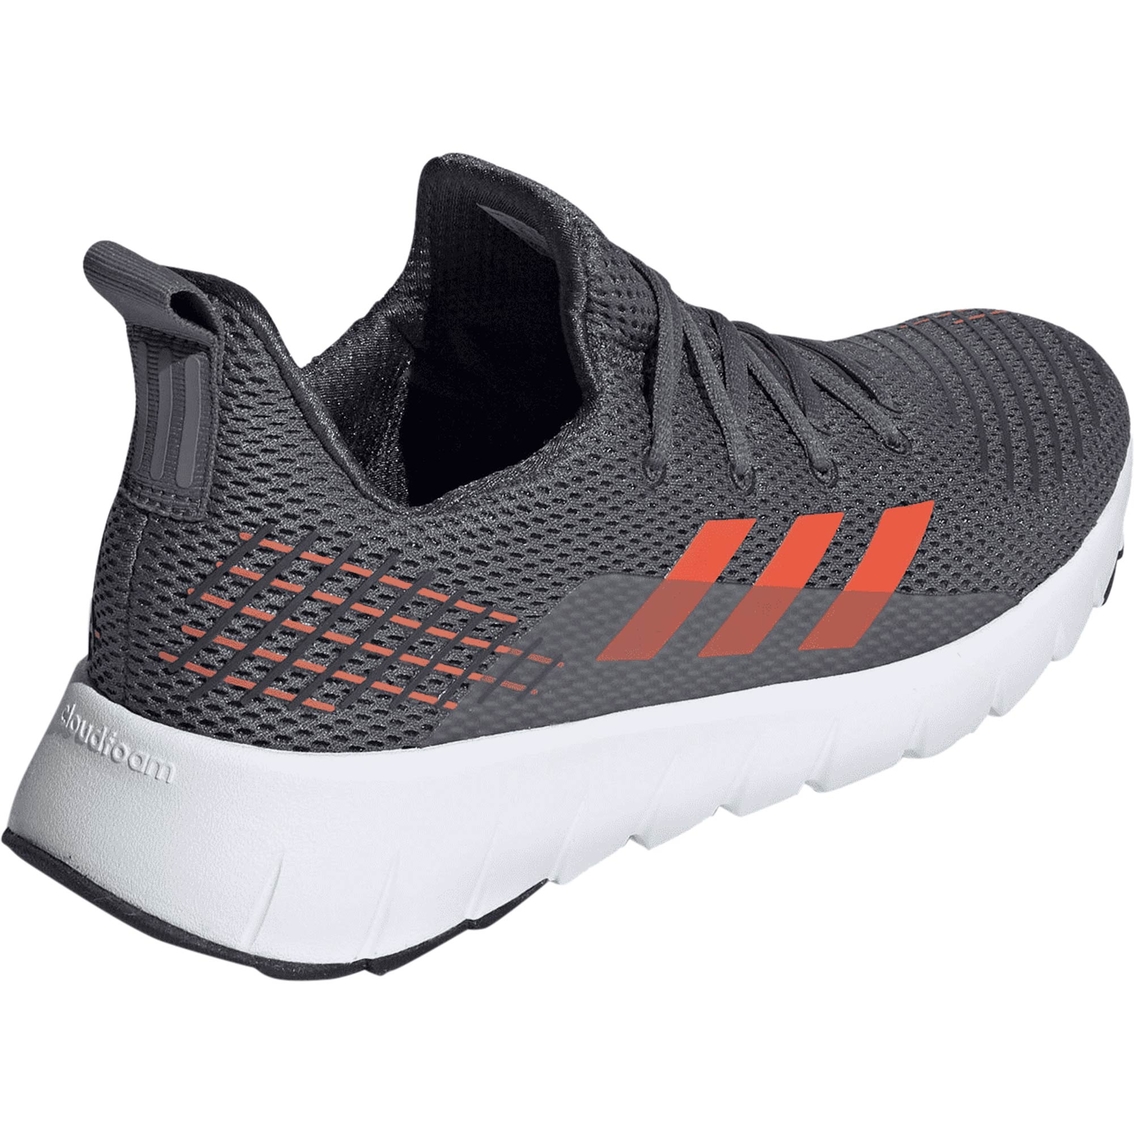 Adidas ASWEEGO Mens Sneakers Shoes Size 8 Color Black/Grey/Grey Comfort